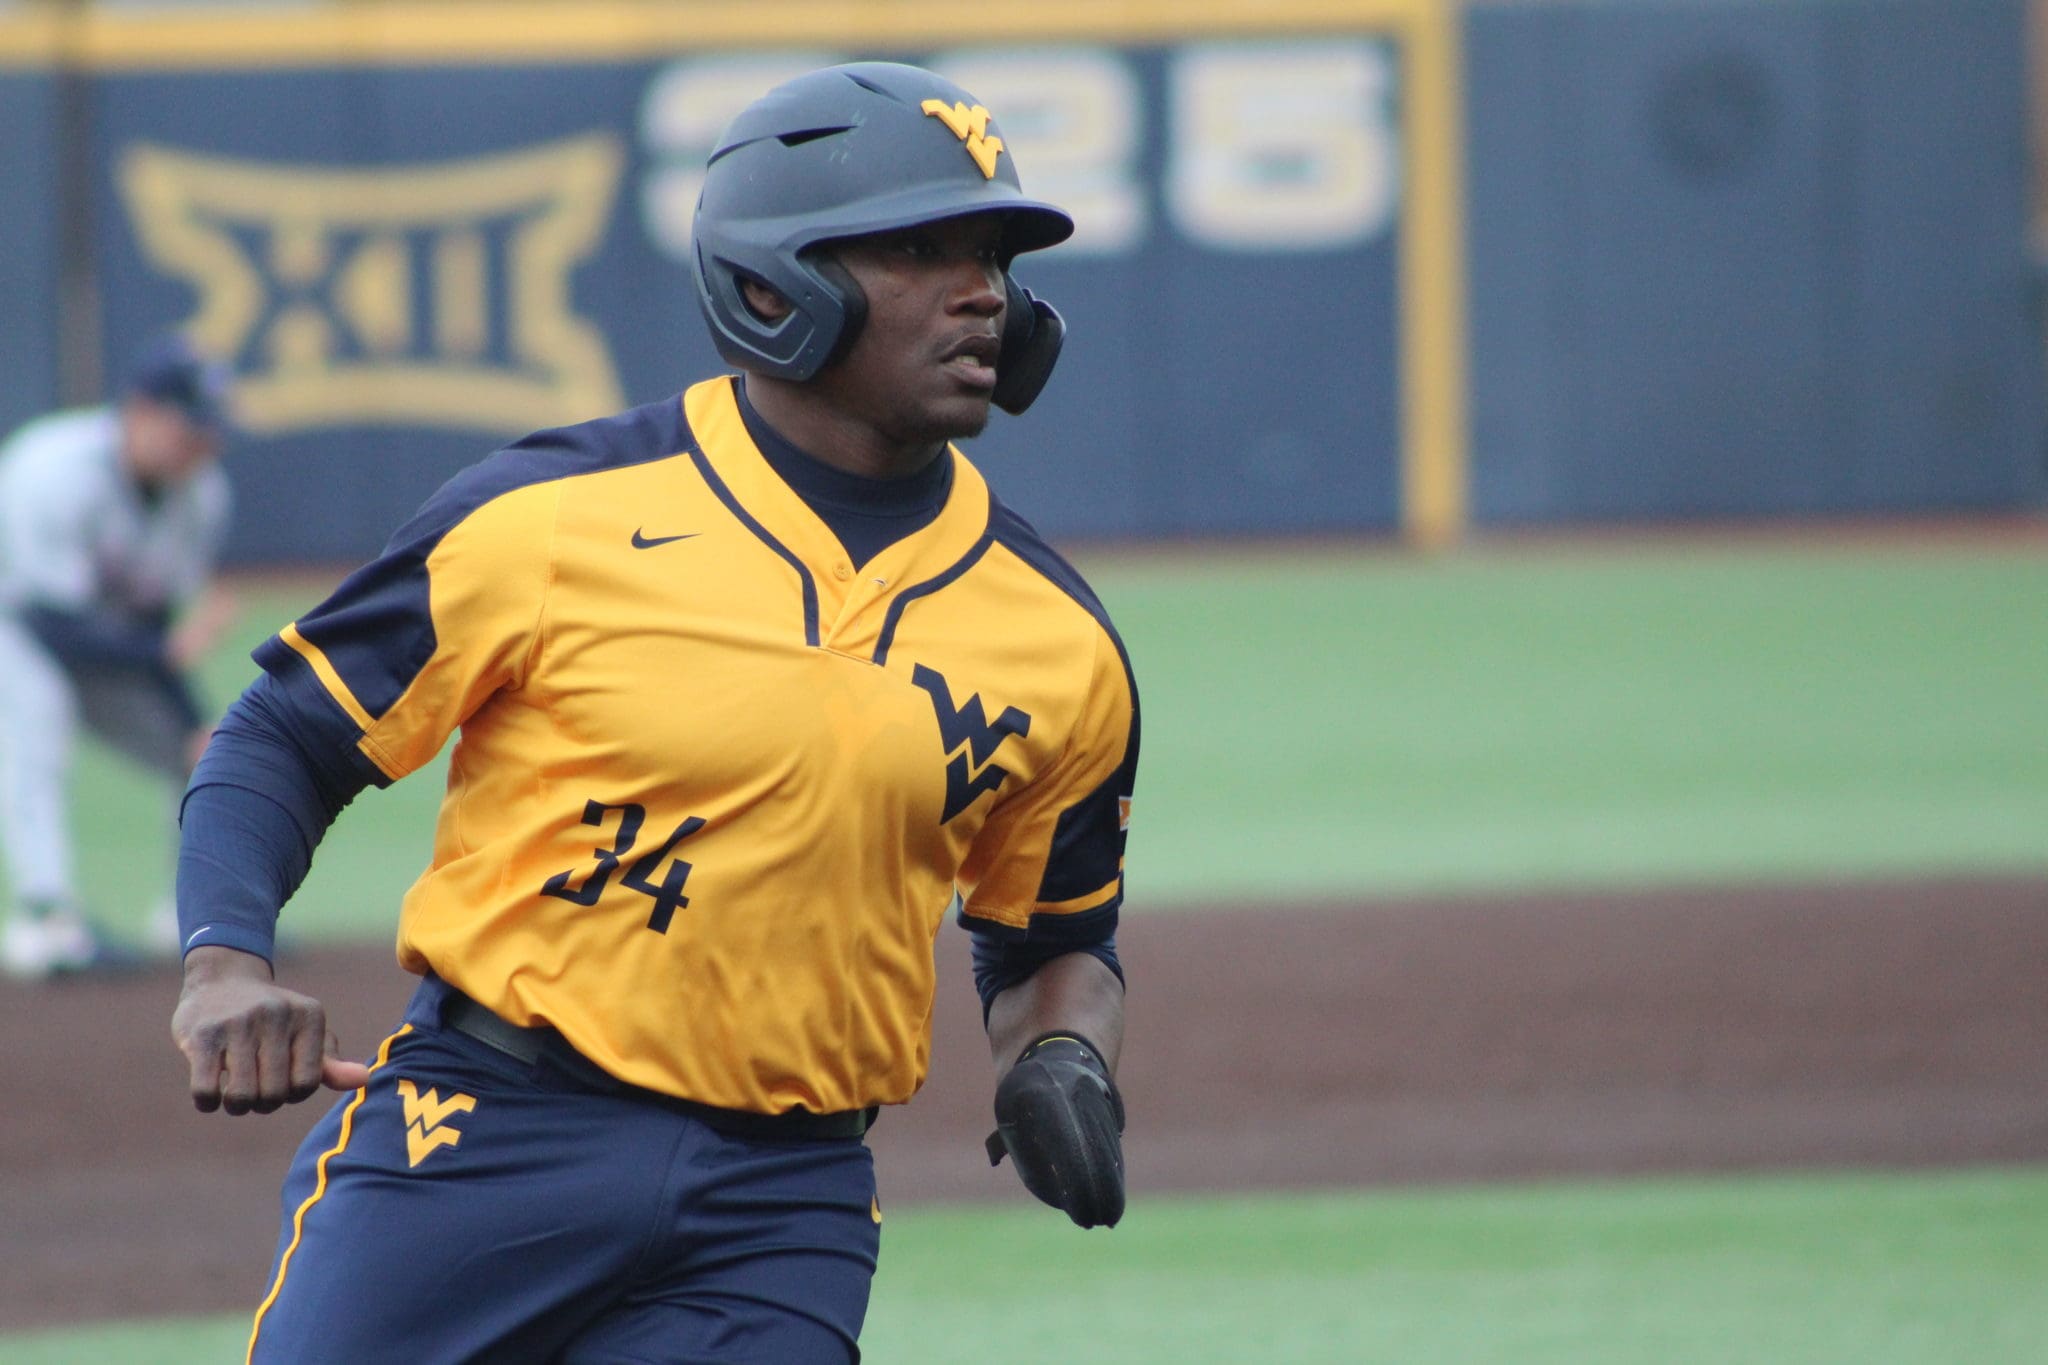 WVU Baseball Prepares to Compete in Talented Big 12 Conference WV